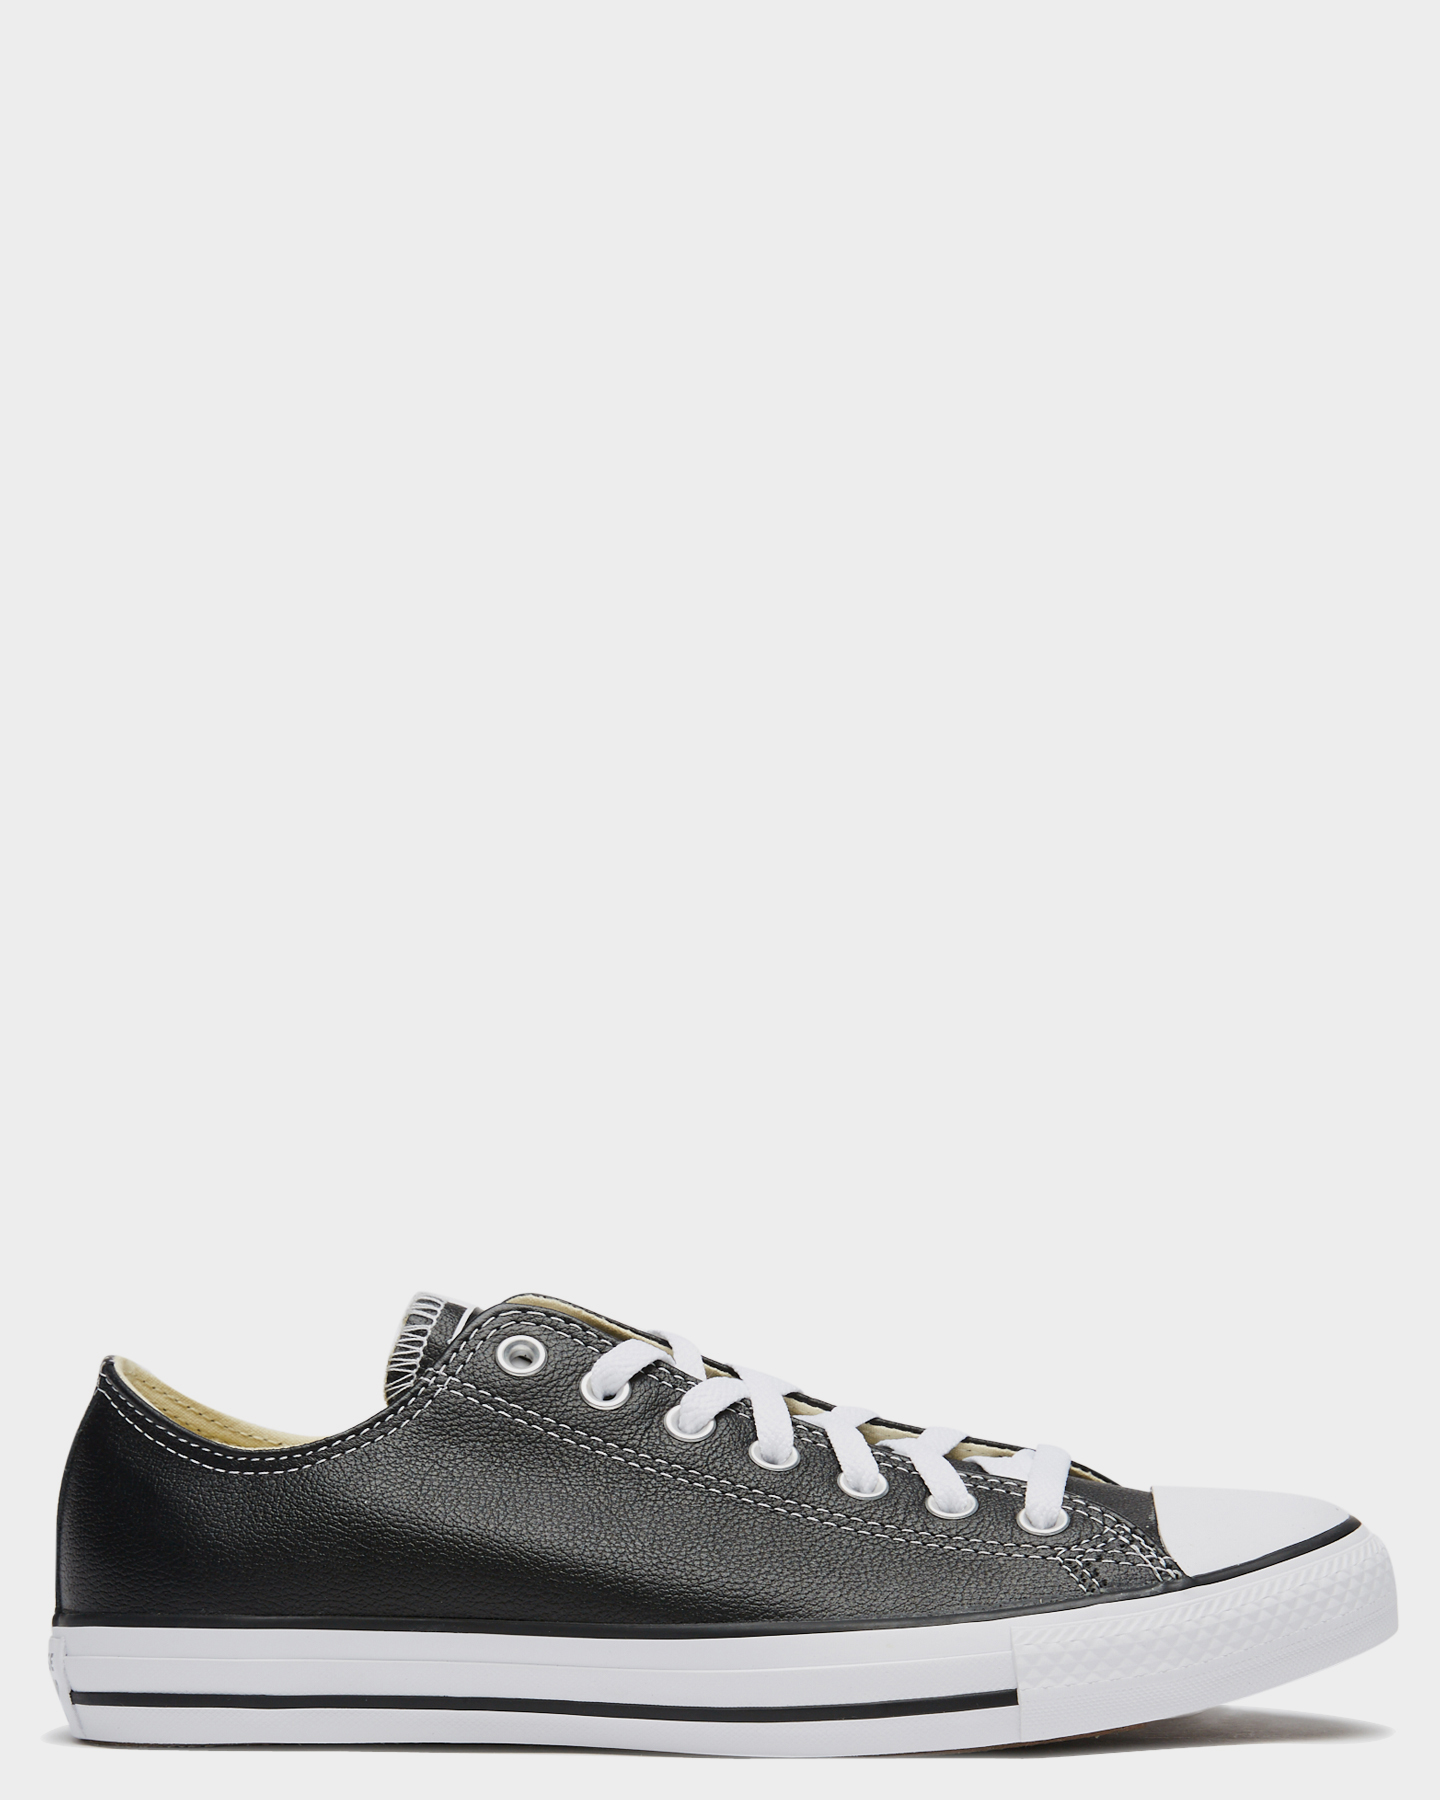 Converse Chuck Taylor All Star Leather Ox Shoe - Black | SurfStitch